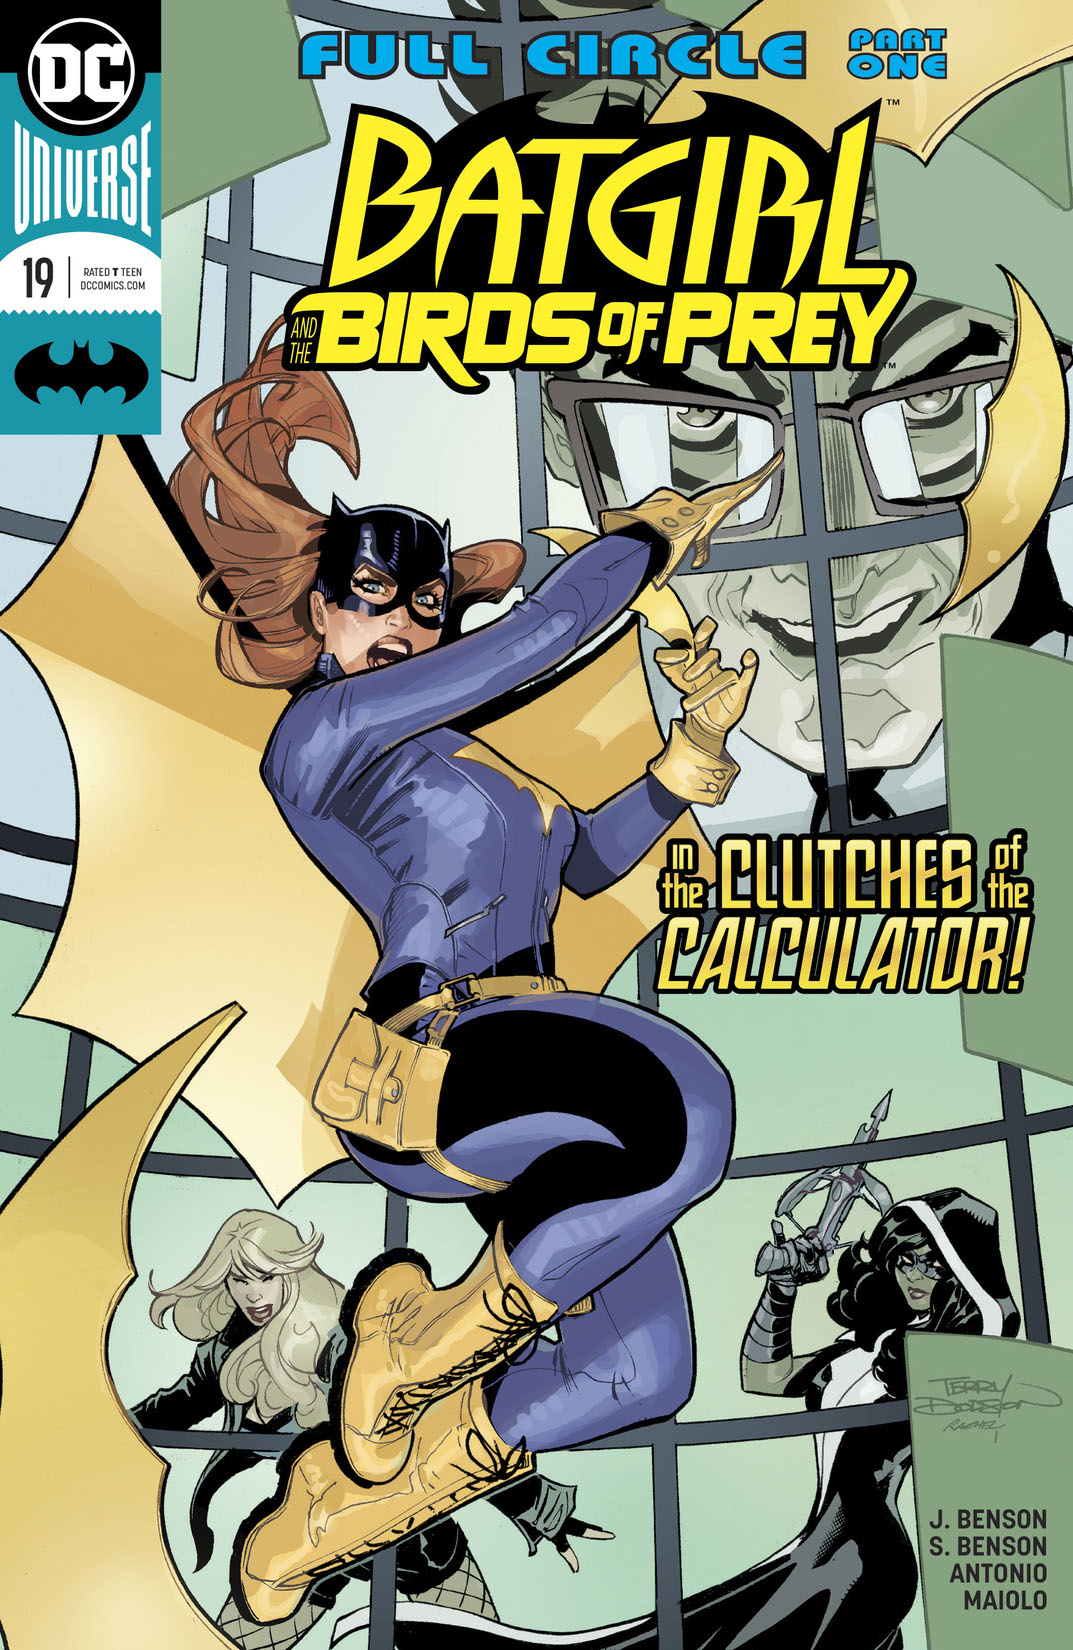 Batgirl and the Birds of Prey #19 preview images